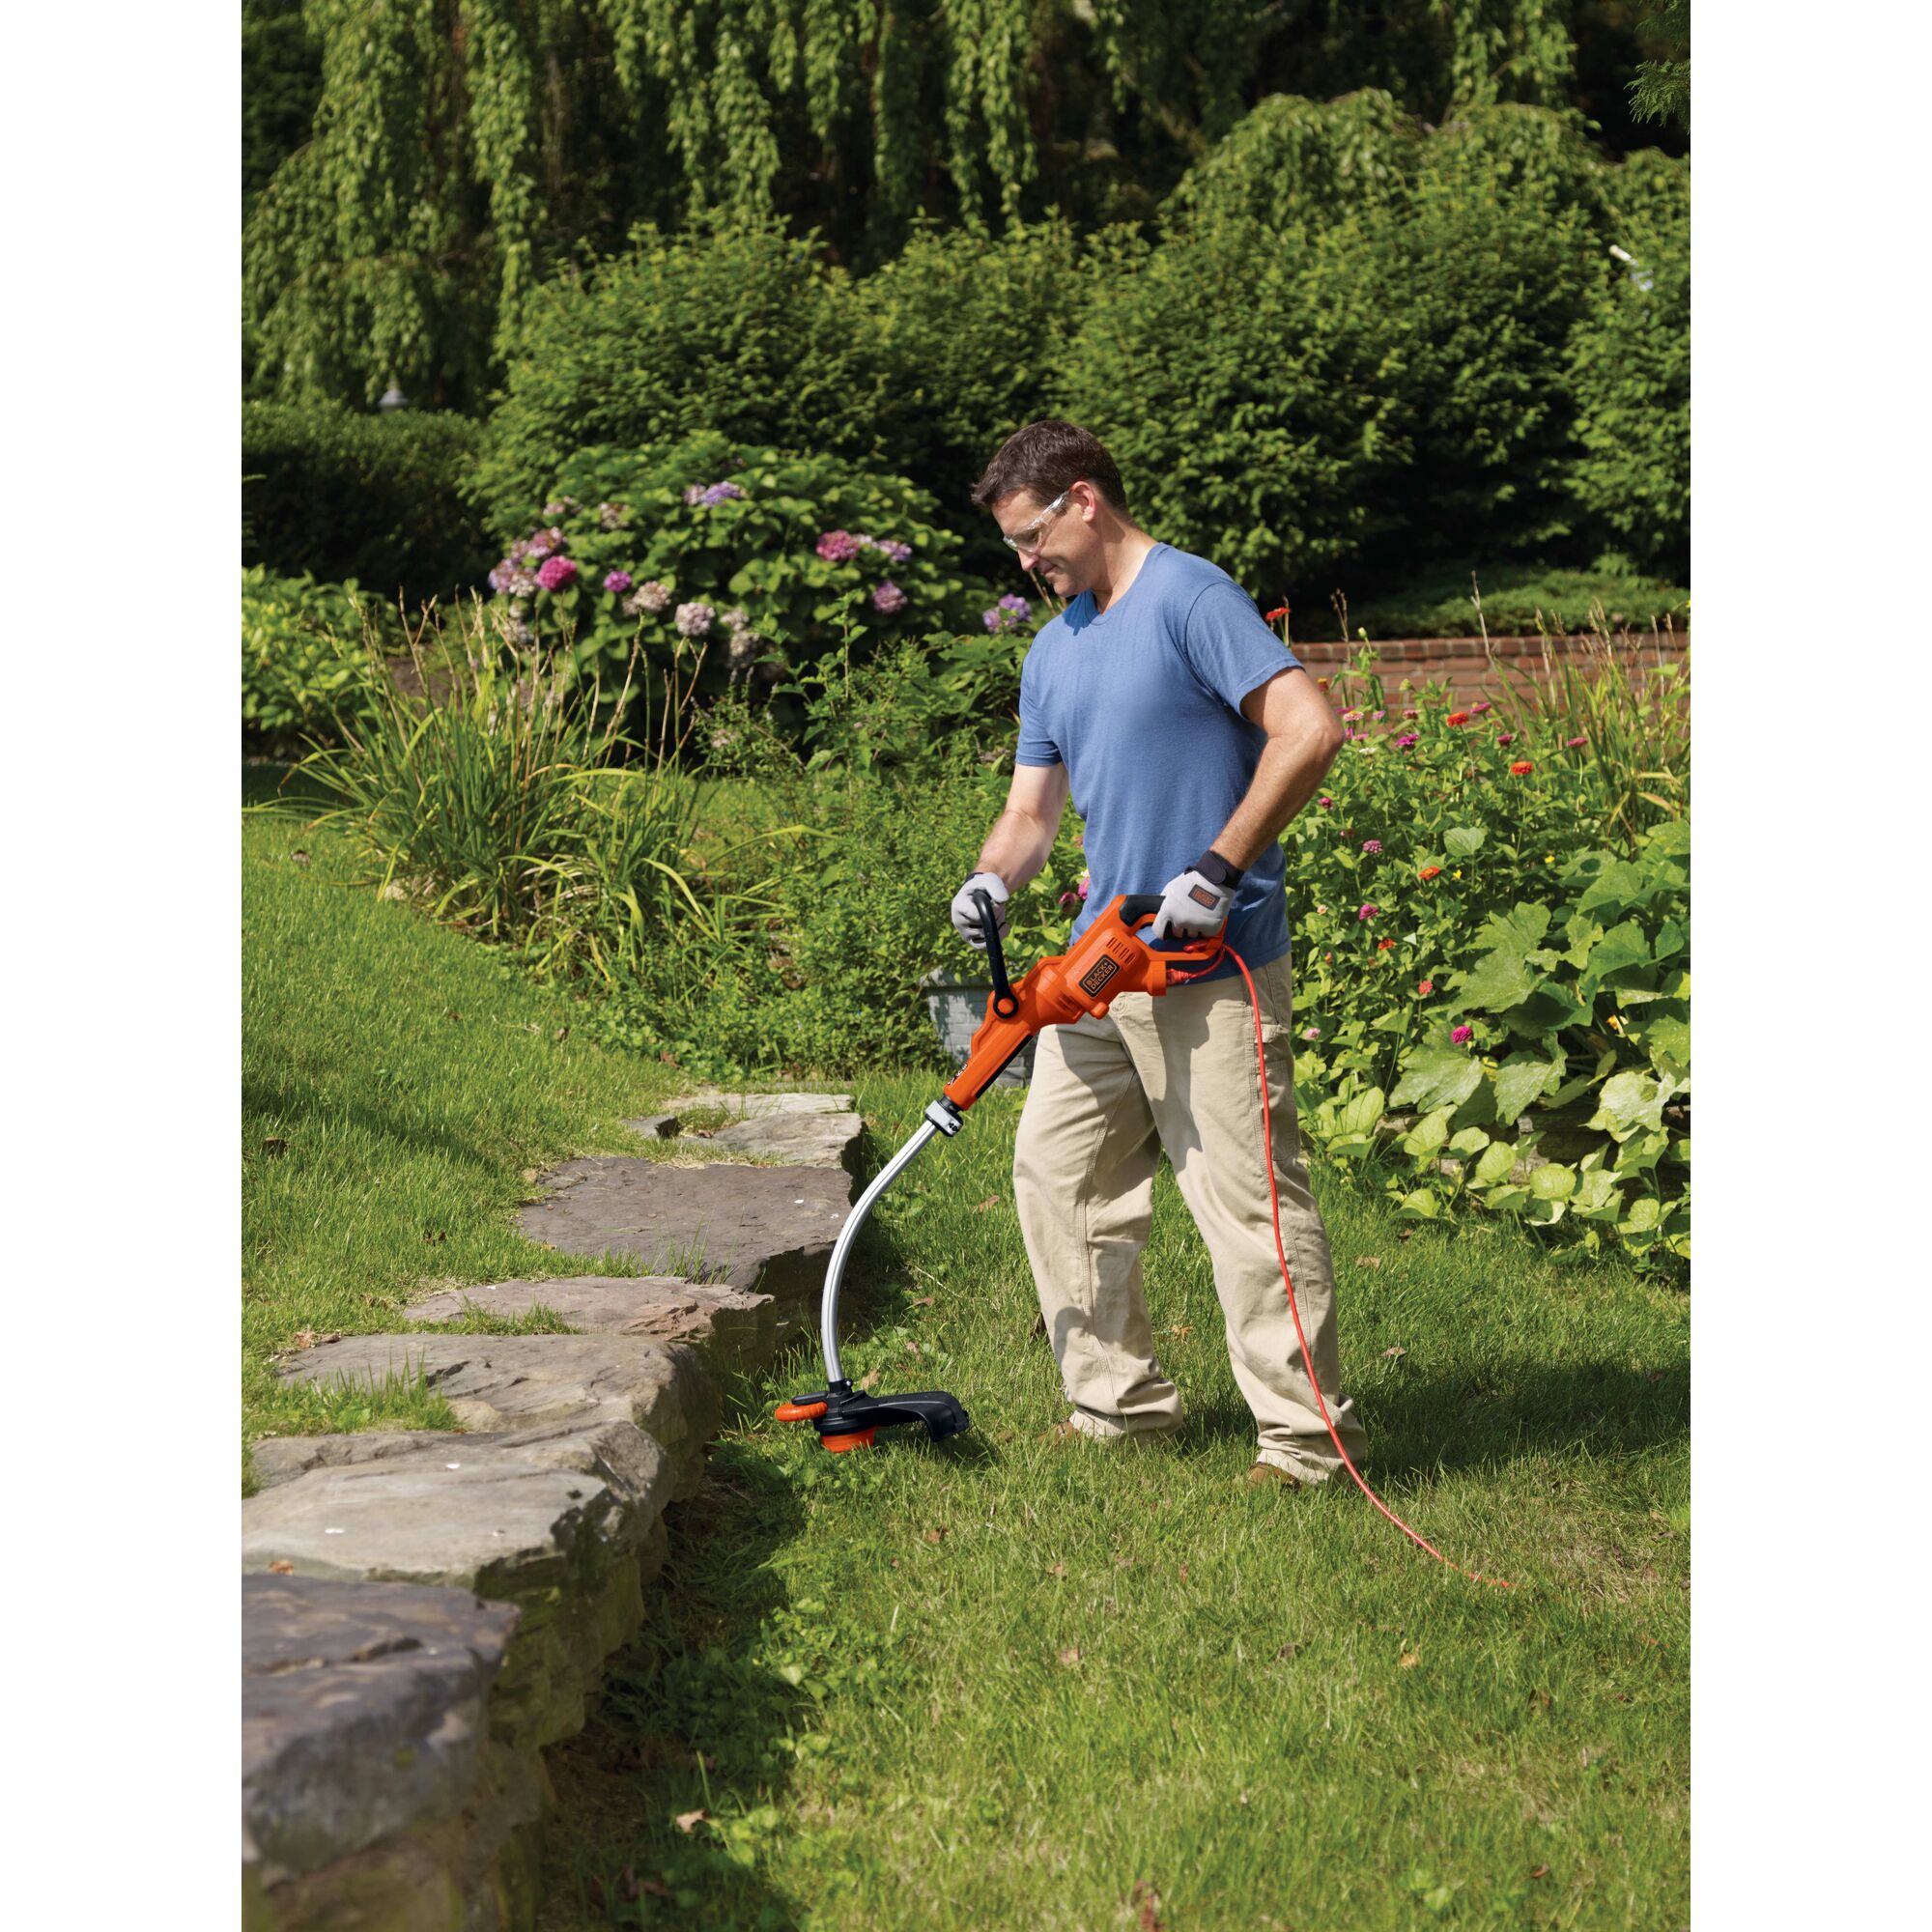 7.5 amp 14 inch Trimmer / Edger being used by a person to trim grass.